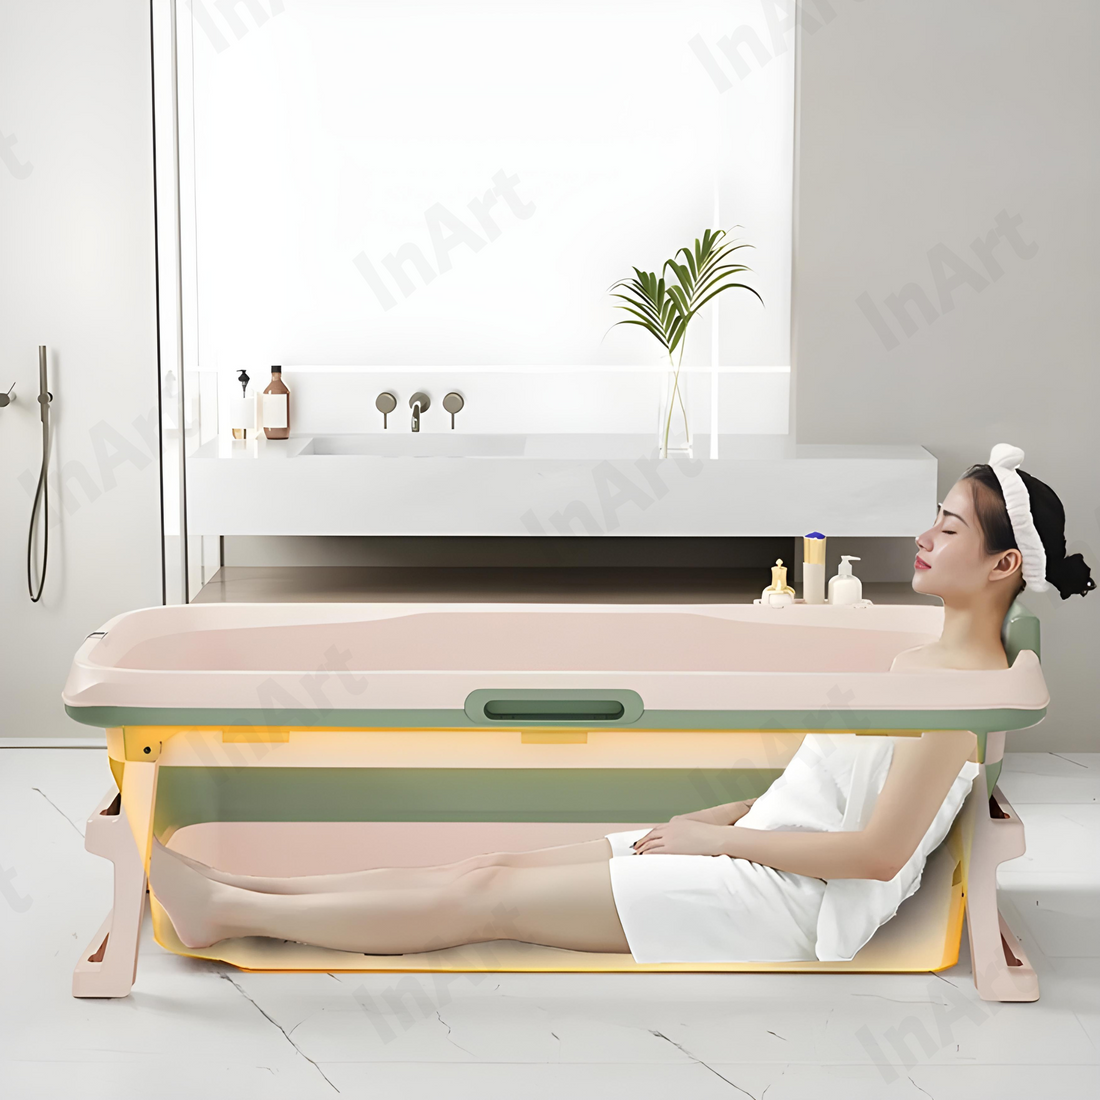 InArt Modern Freestanding Foldable Bathtub with Drain Hose and Cover, Green-Color, 140cm x 60cm x 57.5cm